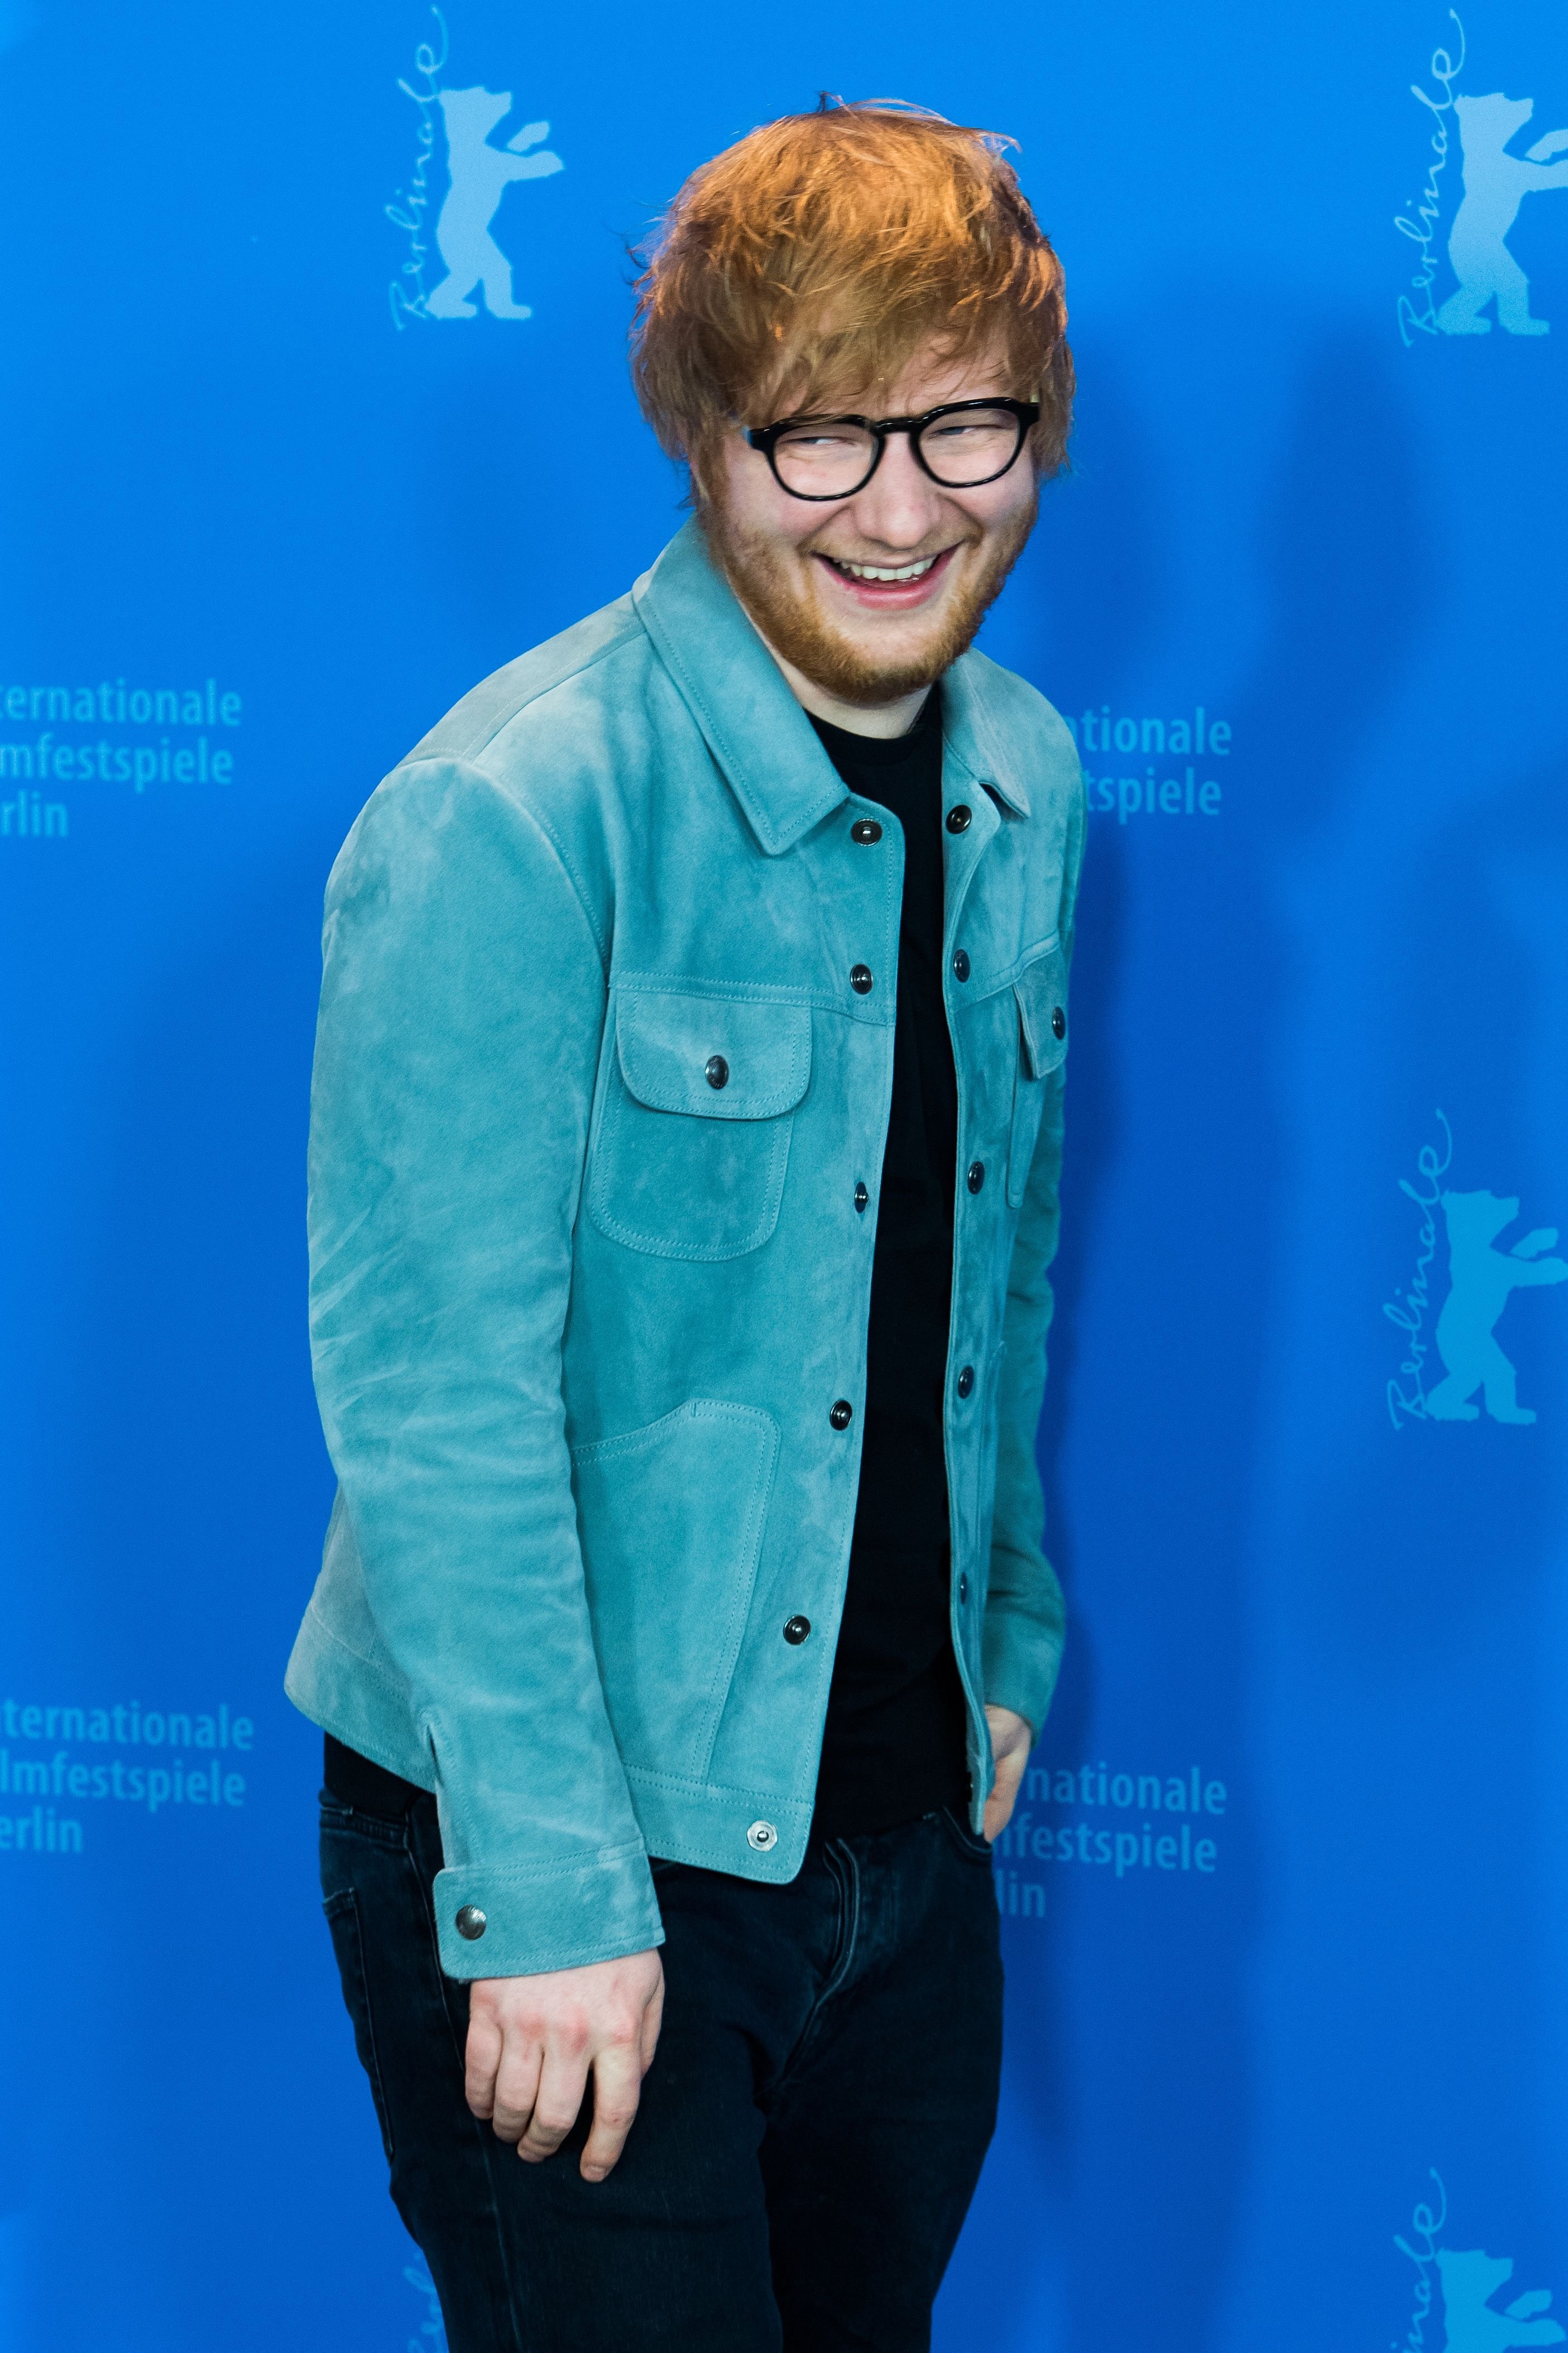 Ed Sheeran at the "Songwriter" photocall during the 68th Berlinale International Film Festival Berlin on February 23, 2018, in Berlin, Germany | Photo: Matthias Nareyek/Getty Images